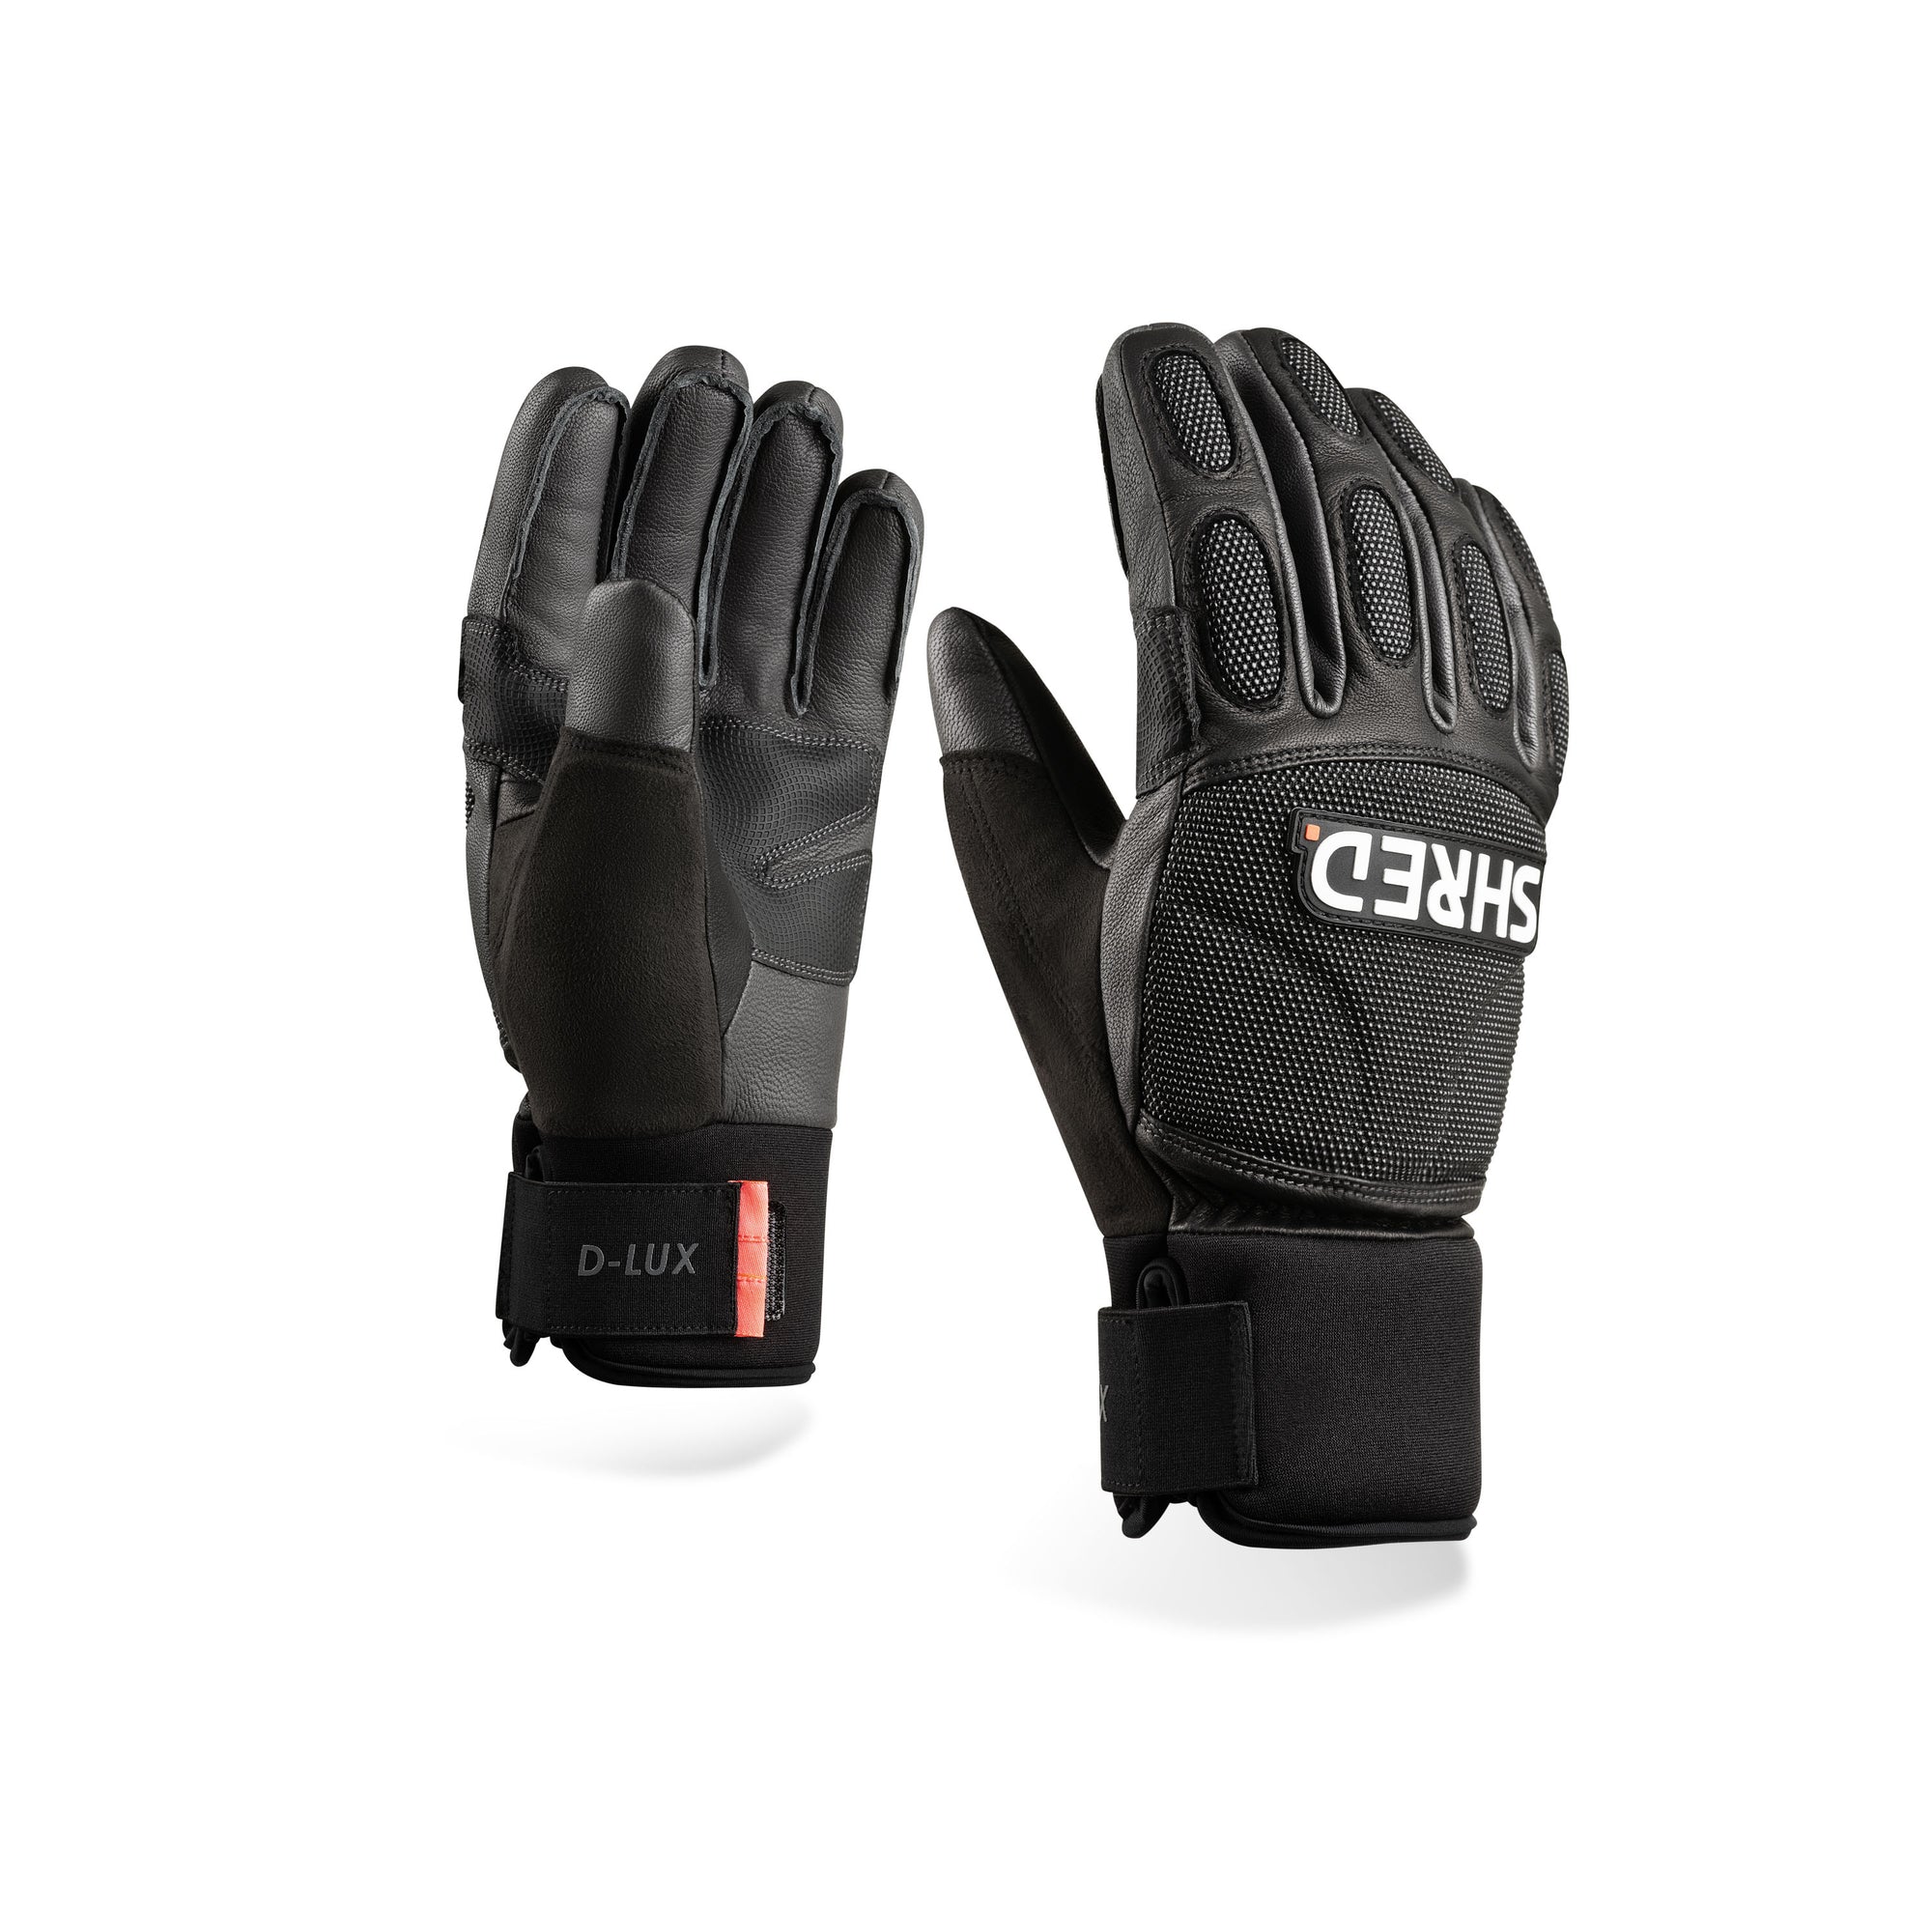 All Mtn Protective Gloves D-Lux - Protective Gloves|BPAGDN13L,BPAGDN13M,BPAGDN13S,BPAGDN13XL,BPAGDN13XS